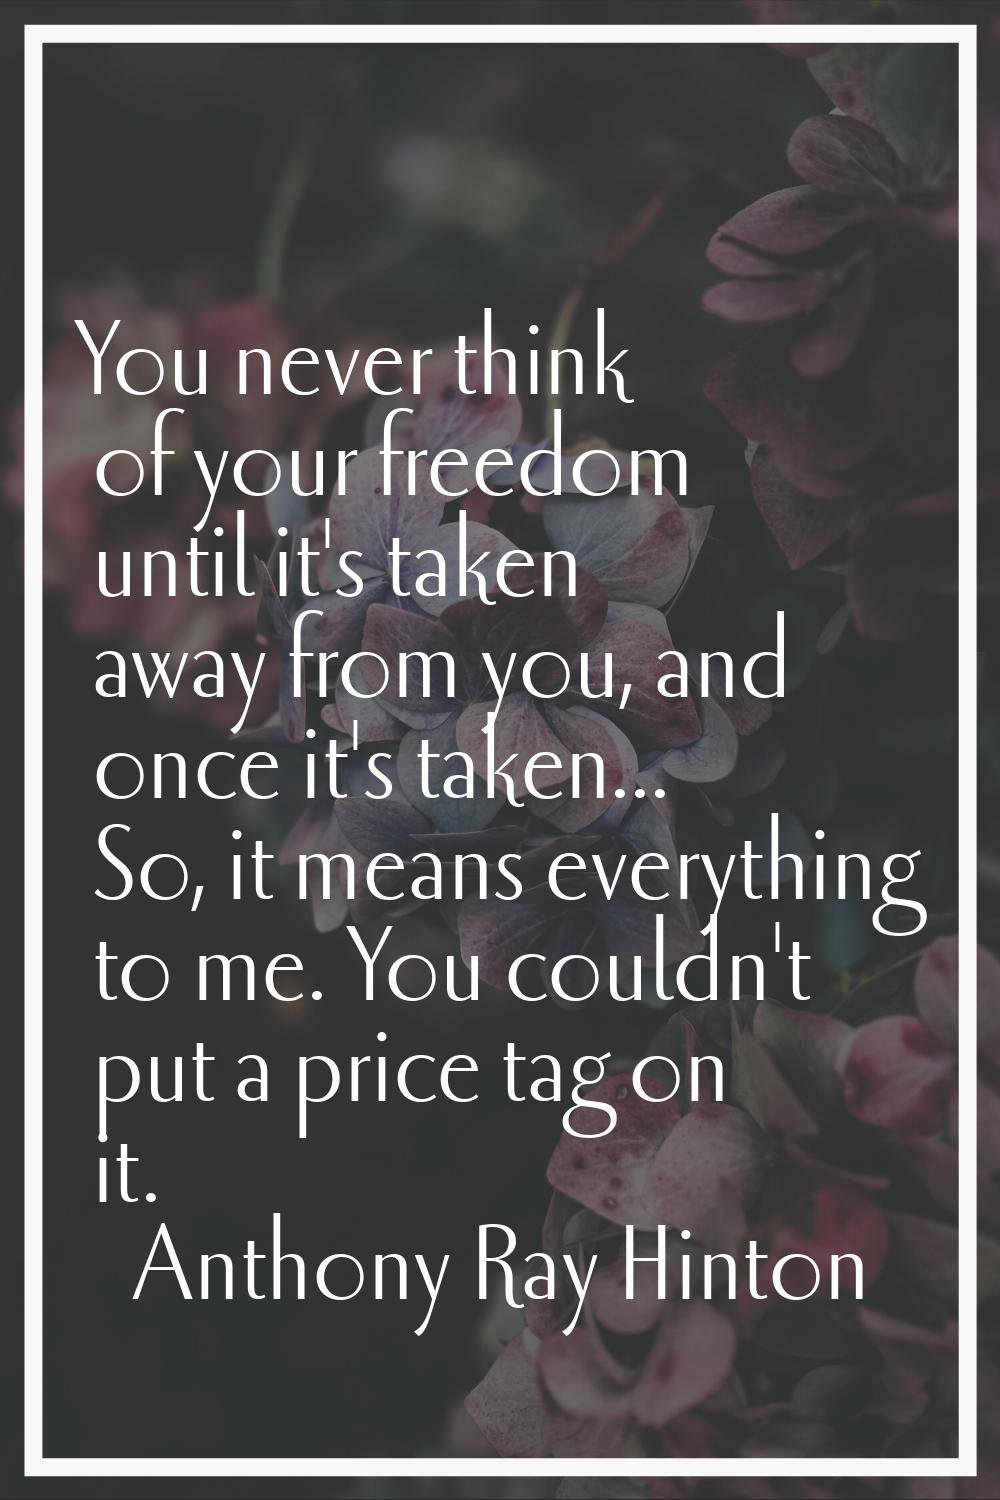 You never think of your freedom until it's taken away from you, and once it's taken... So, it means